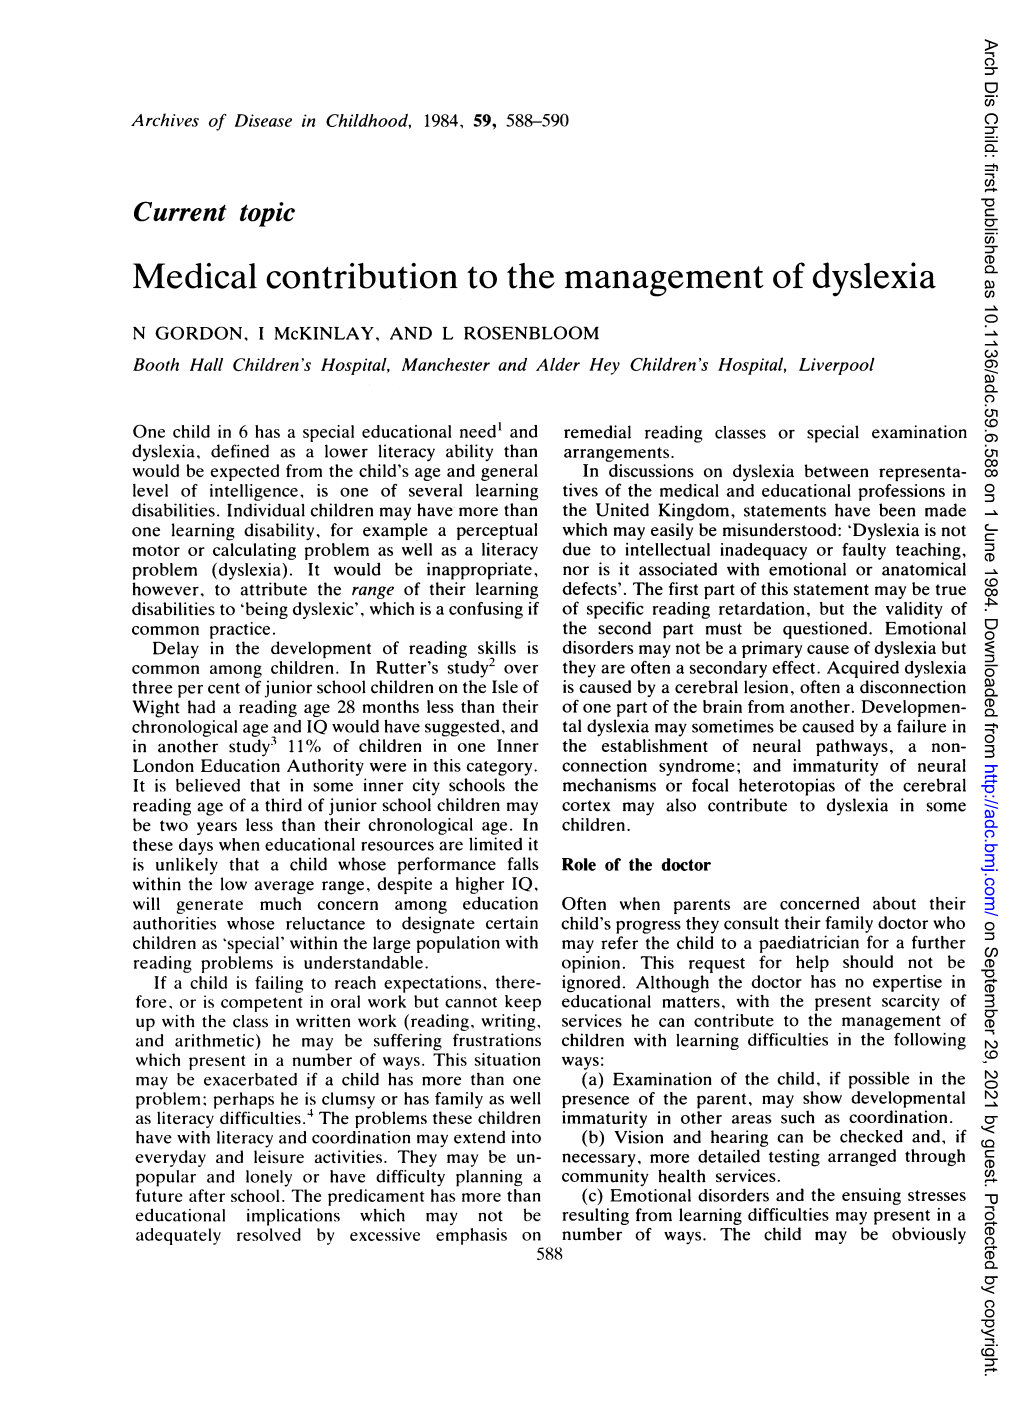 Medical Contribution to the Management of Dyslexia